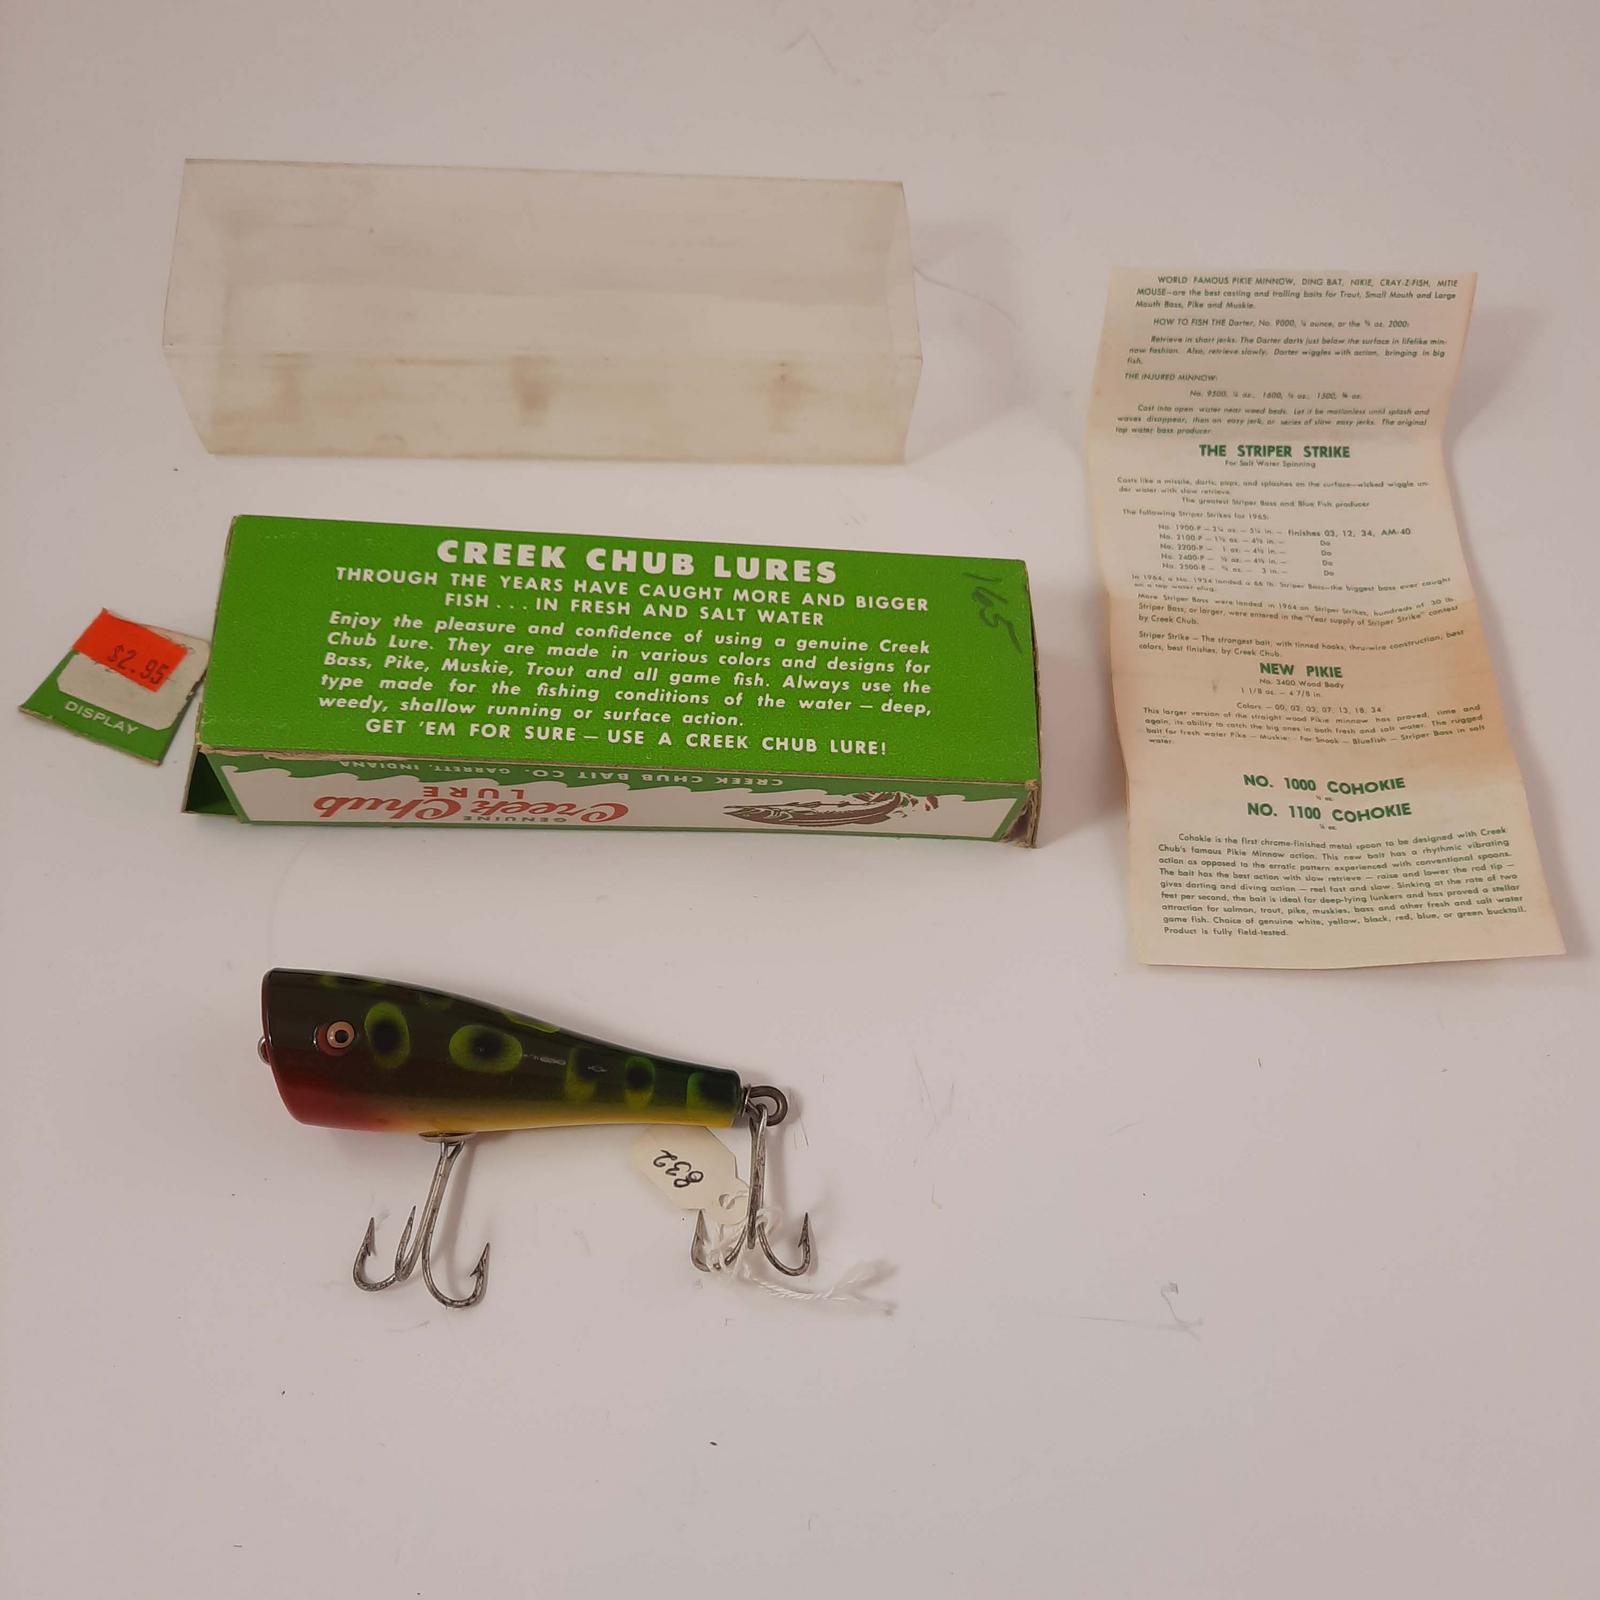 Creek Chub Plunker with box/lid and paperwork